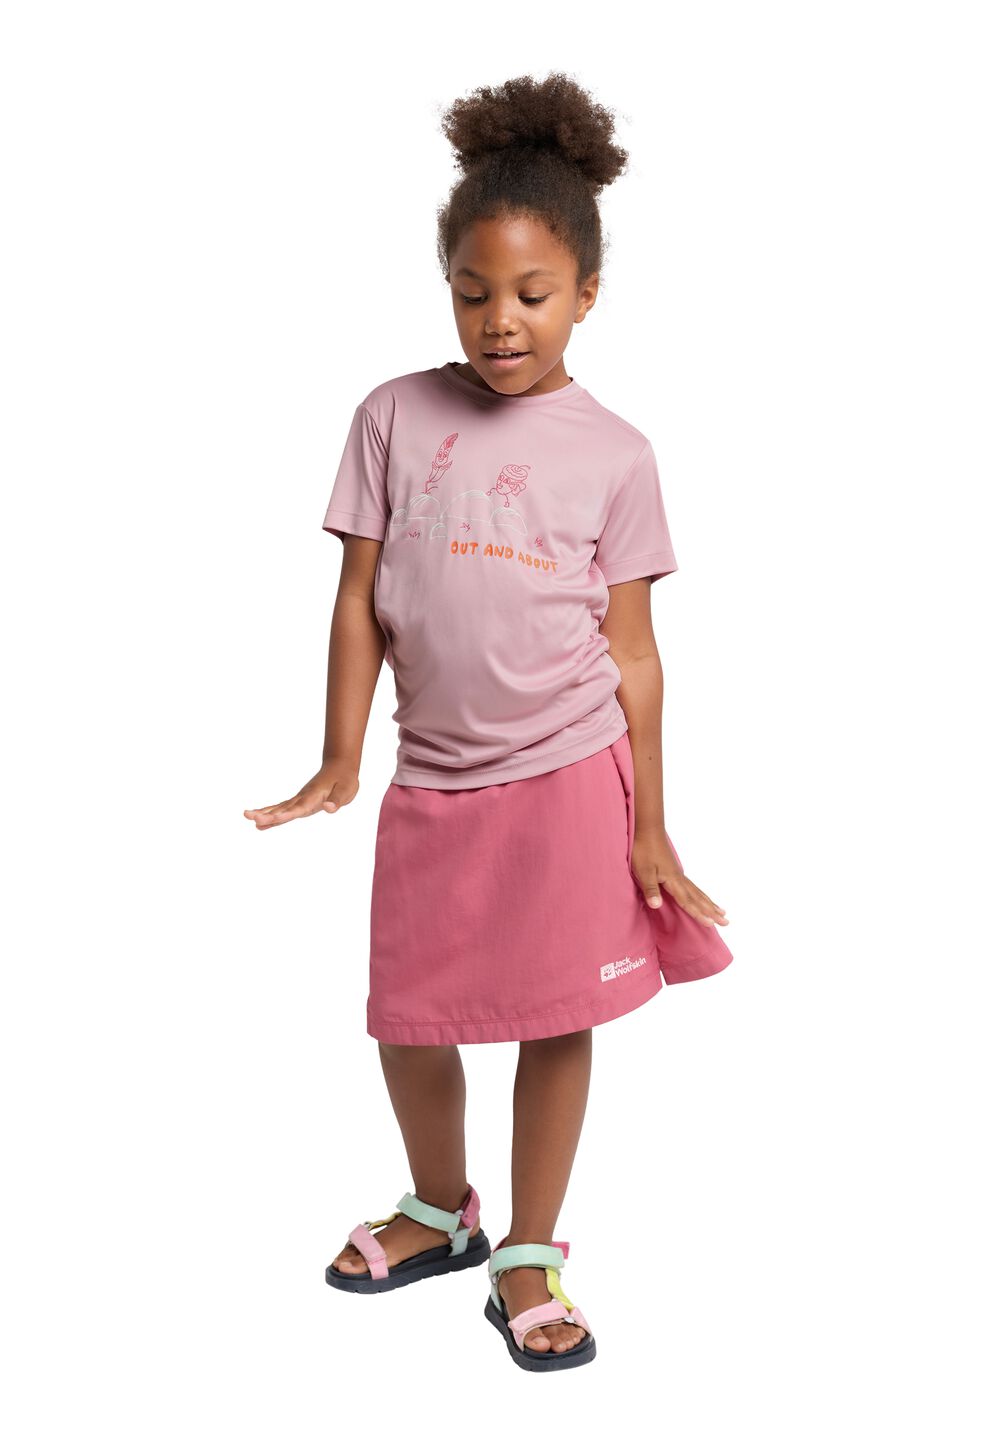 Jack Wolfskin OUT AND About T-Shirt Kids Functioneel shirt Kinderen 116 water lily water lily